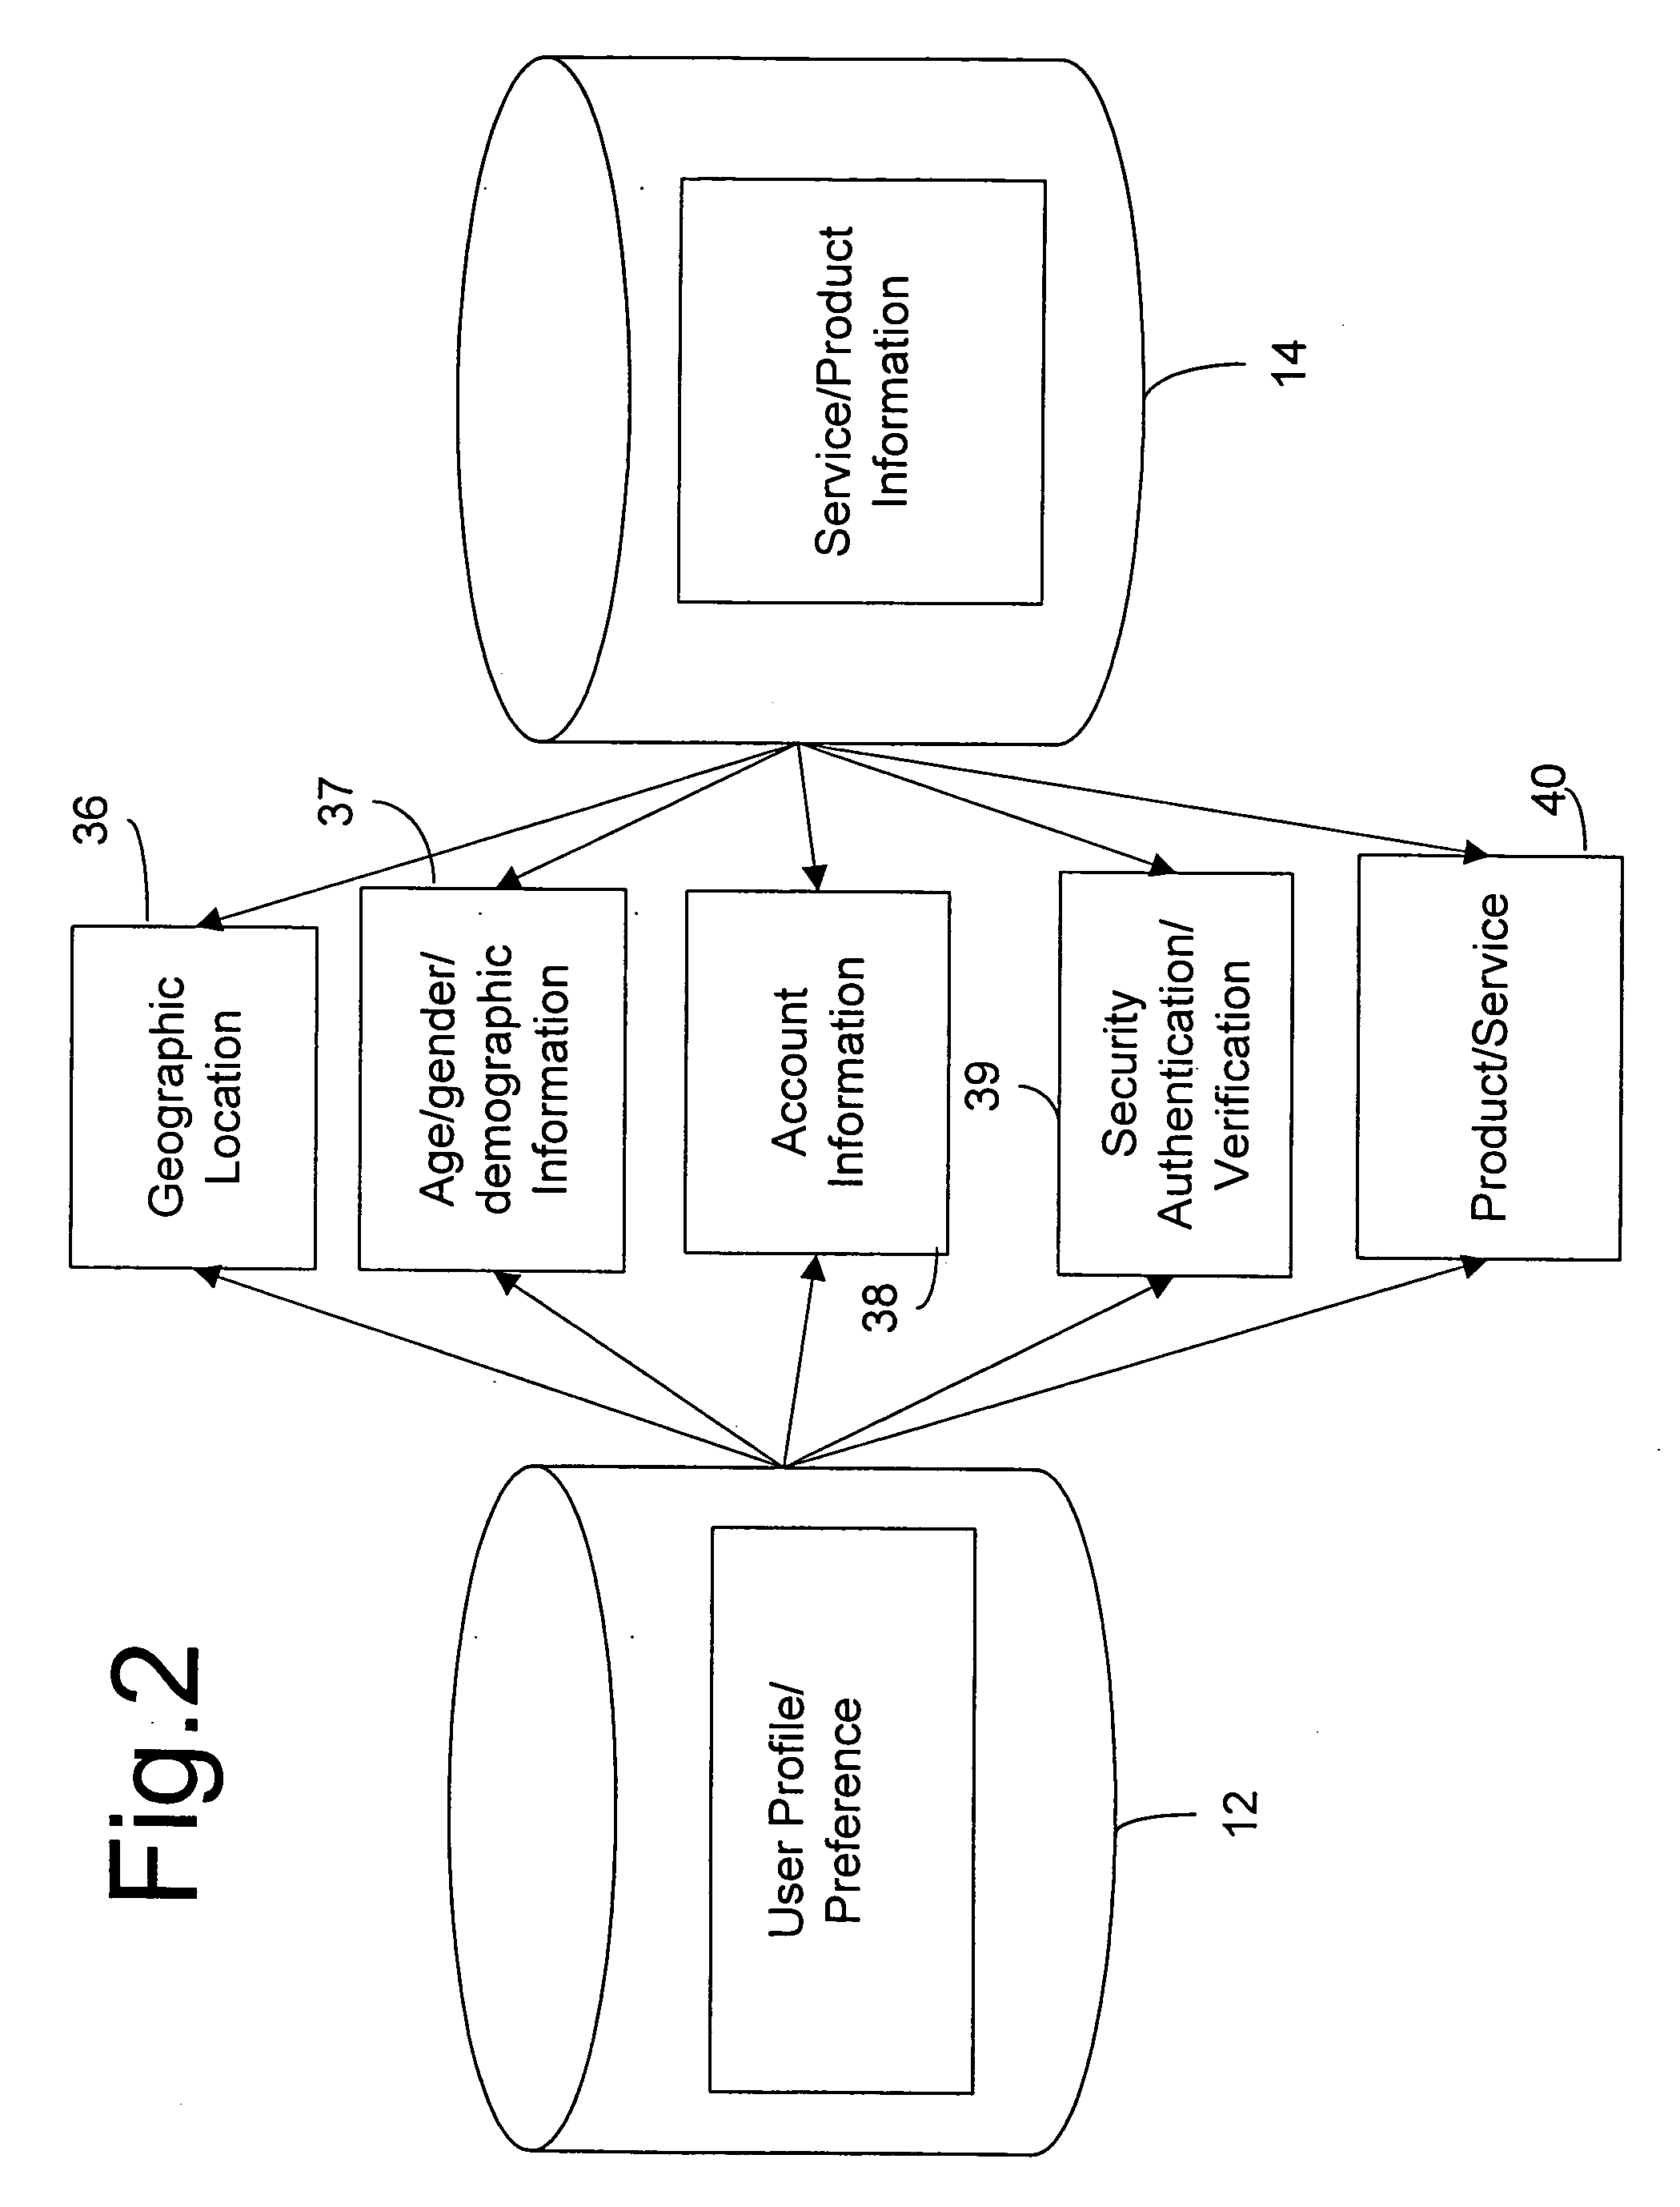 System and method for providing customized voice connection services via gatekeeper